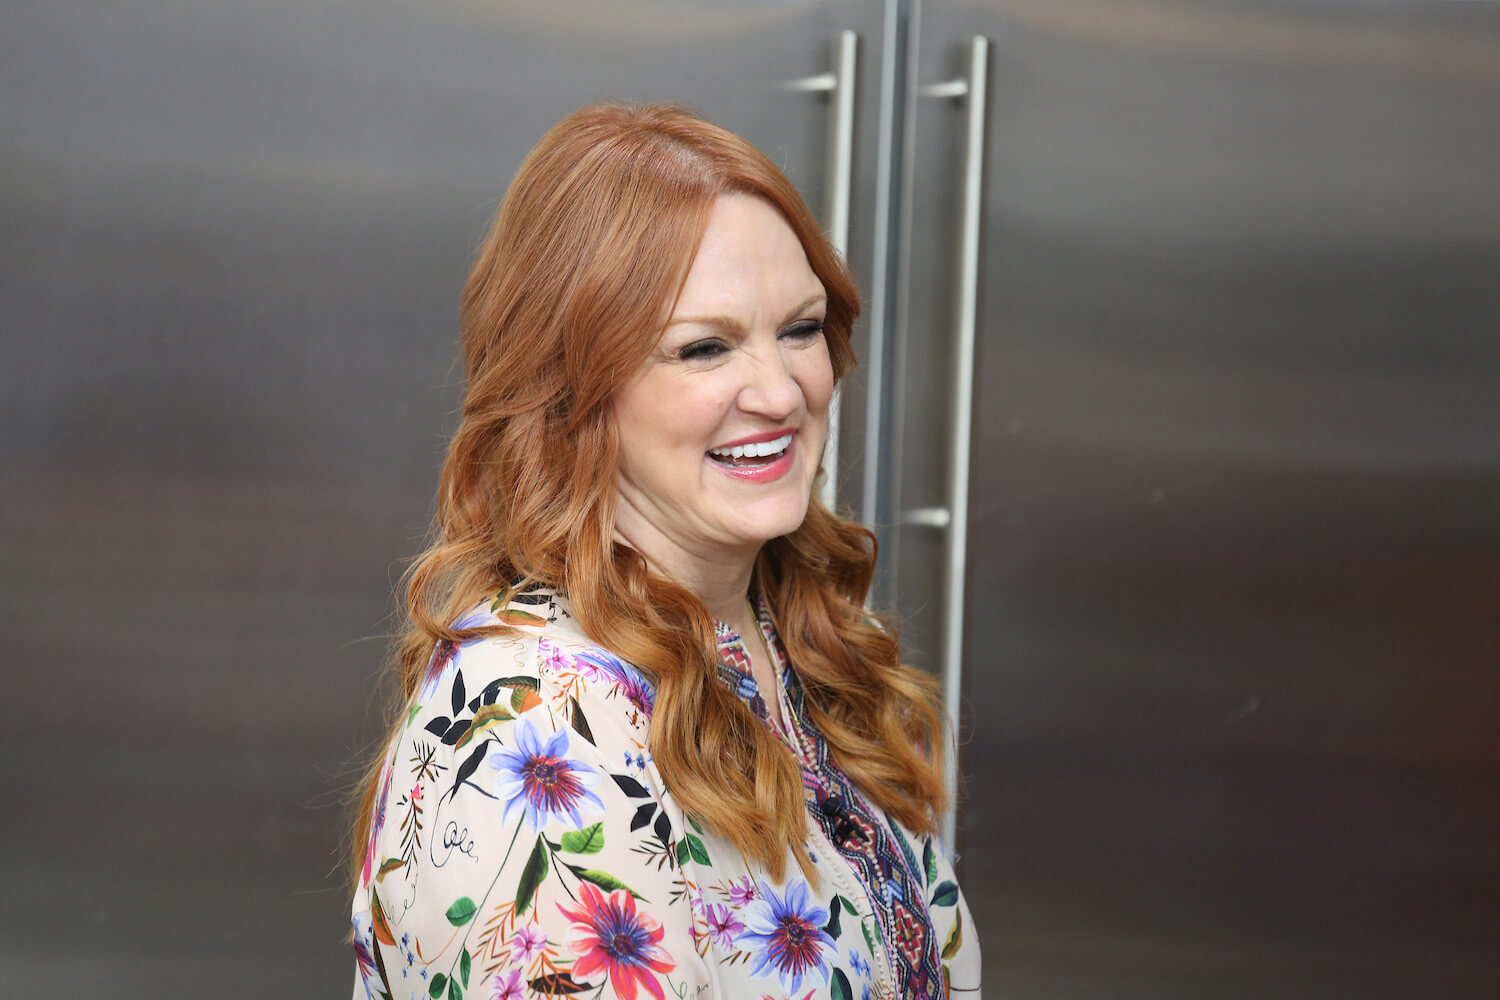 A close-up of 'The Pioneer Woman' Ree Drummond laughing in a kitchen